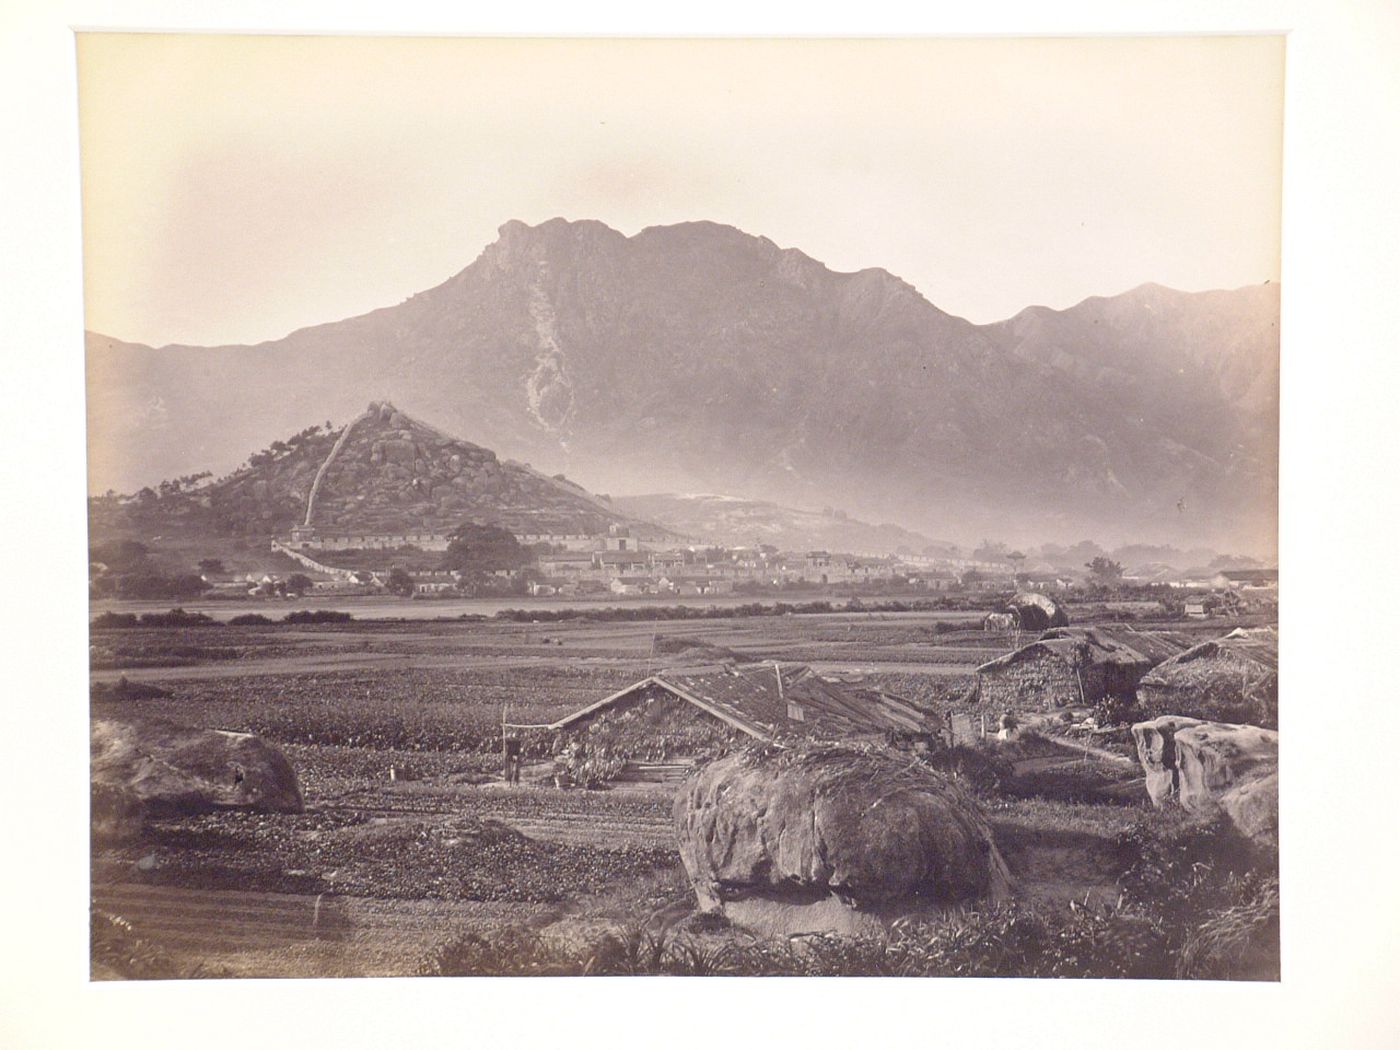 View of huts and agricultural land with the Kowloon Walled City in the background, Kowloon, Hong Kong (now Hong Kong, China)